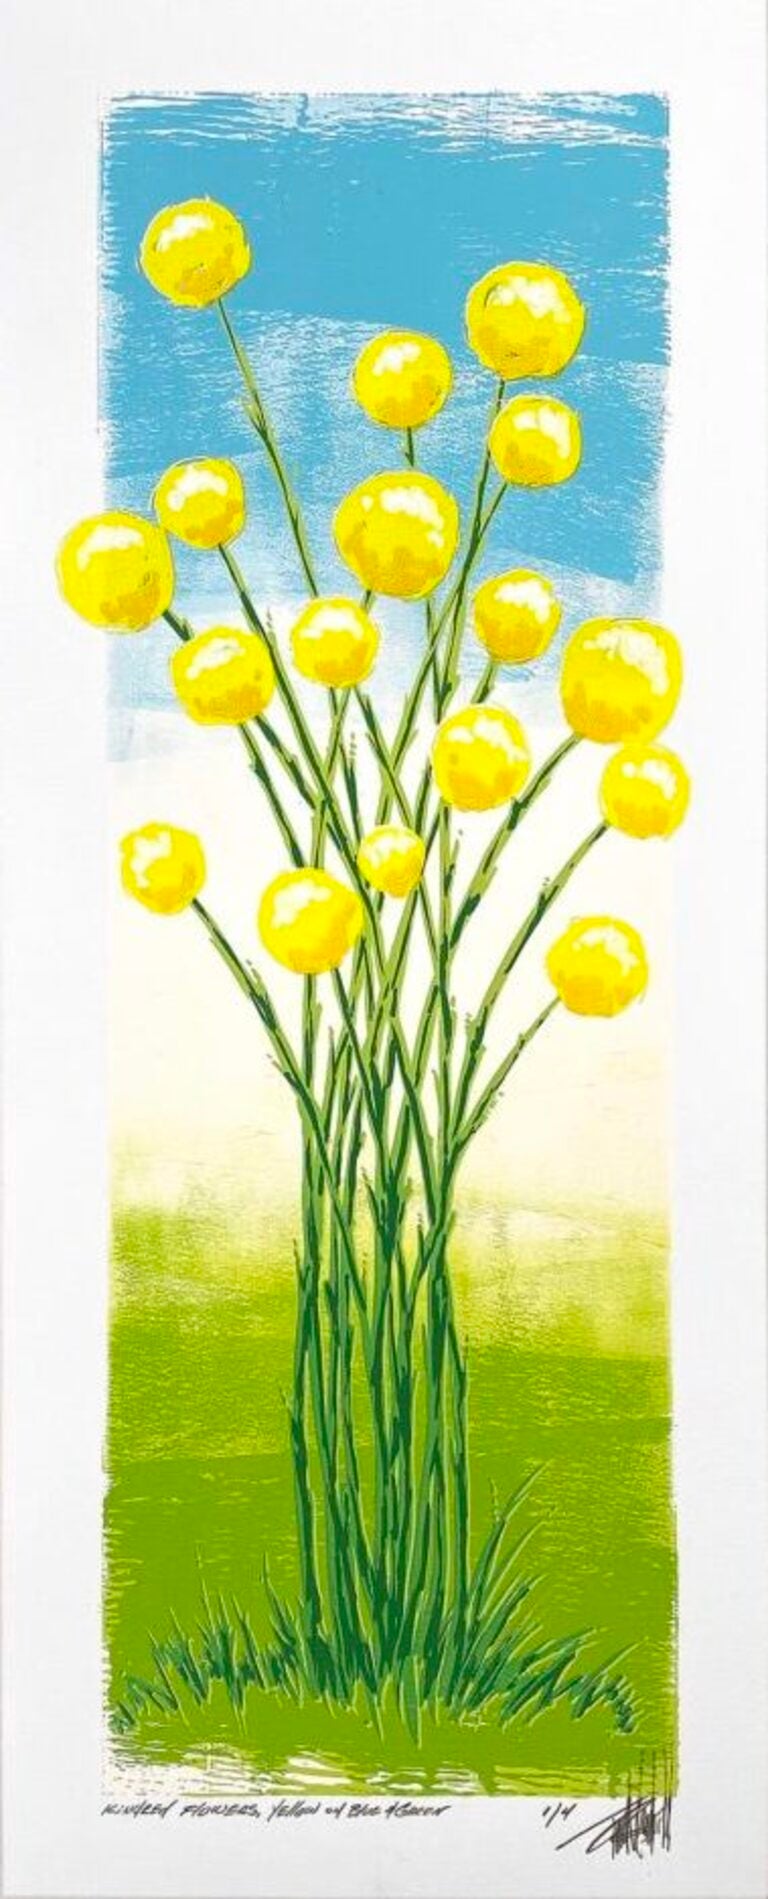 Kindred Flowers, Yellow on Blue and Green (2/4) - Print by Terrell Thornhill 